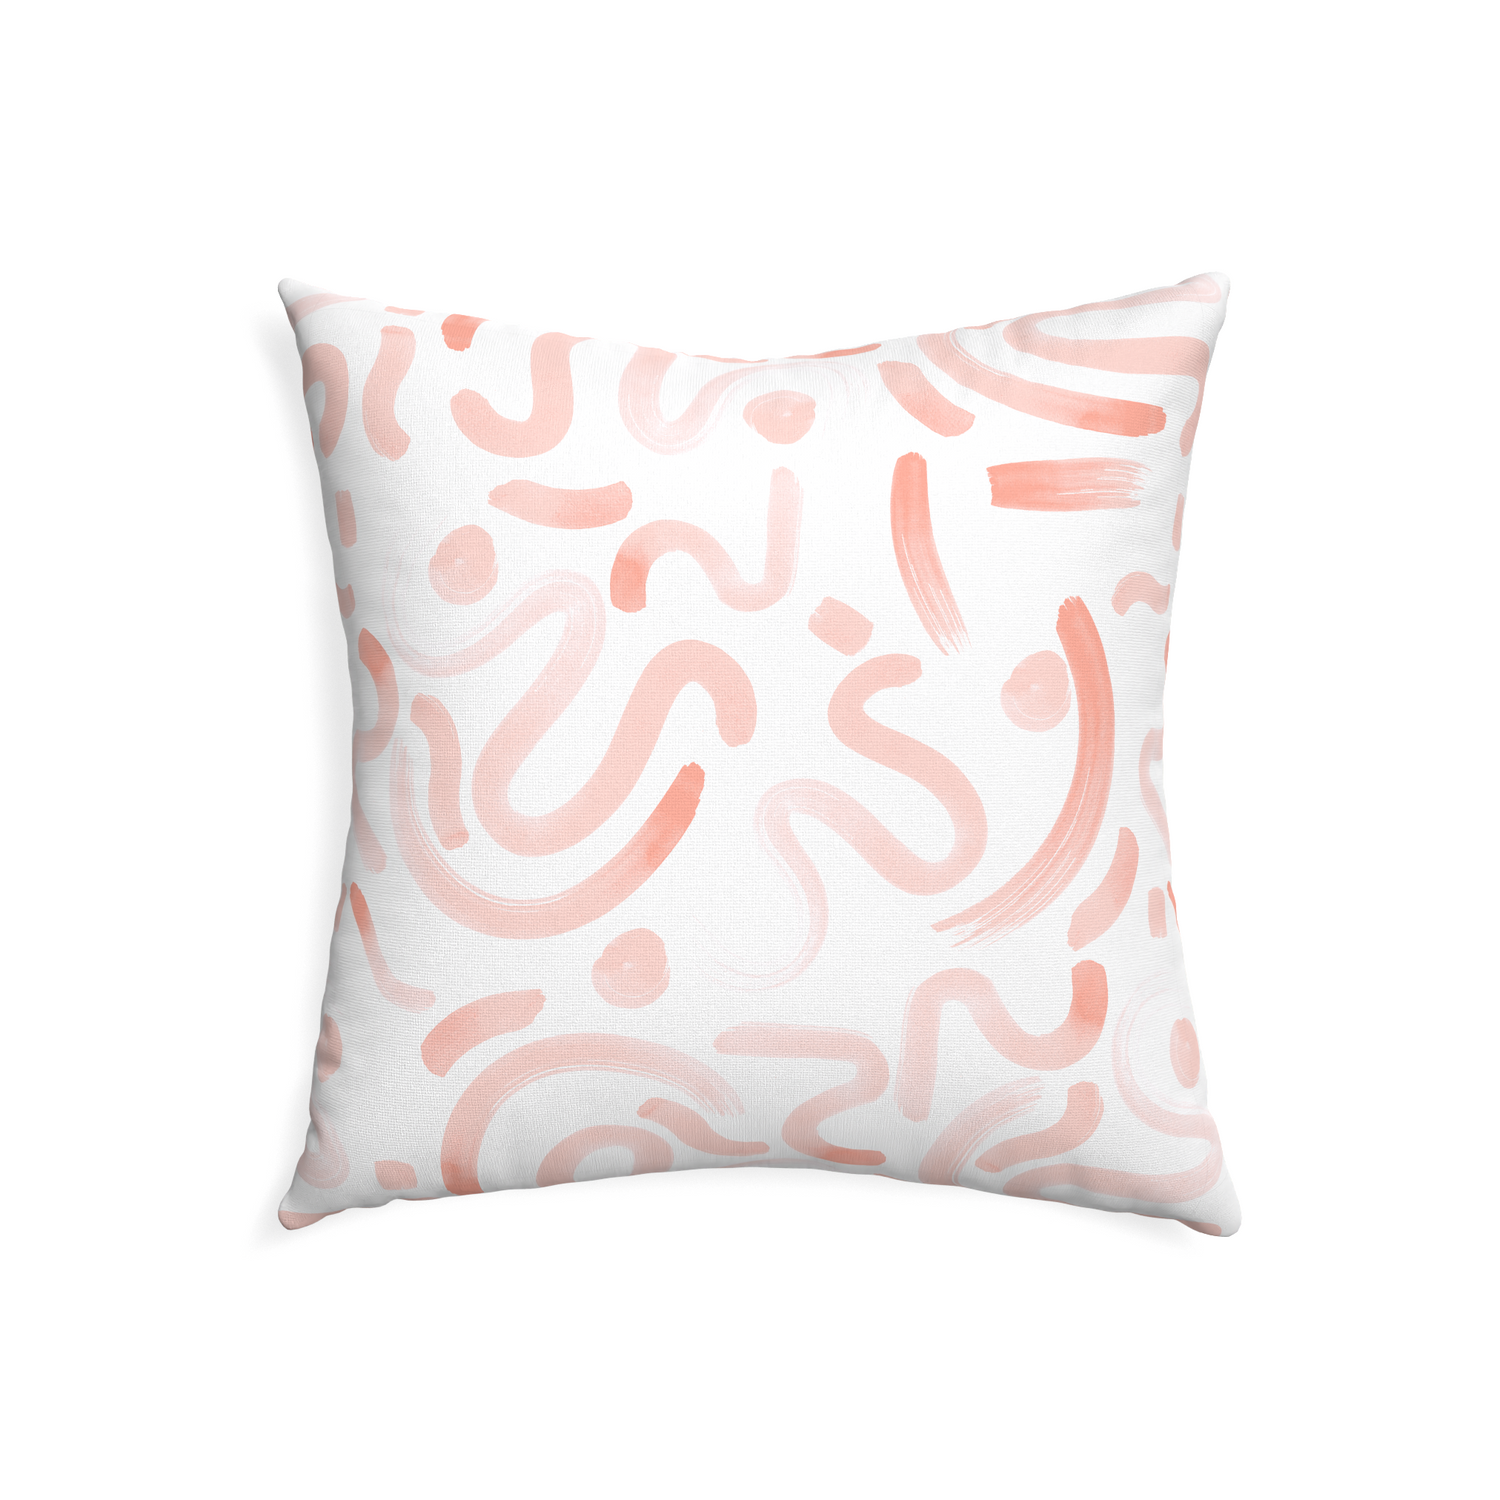 22-square hockney pink custom pink graphicpillow with none on white background